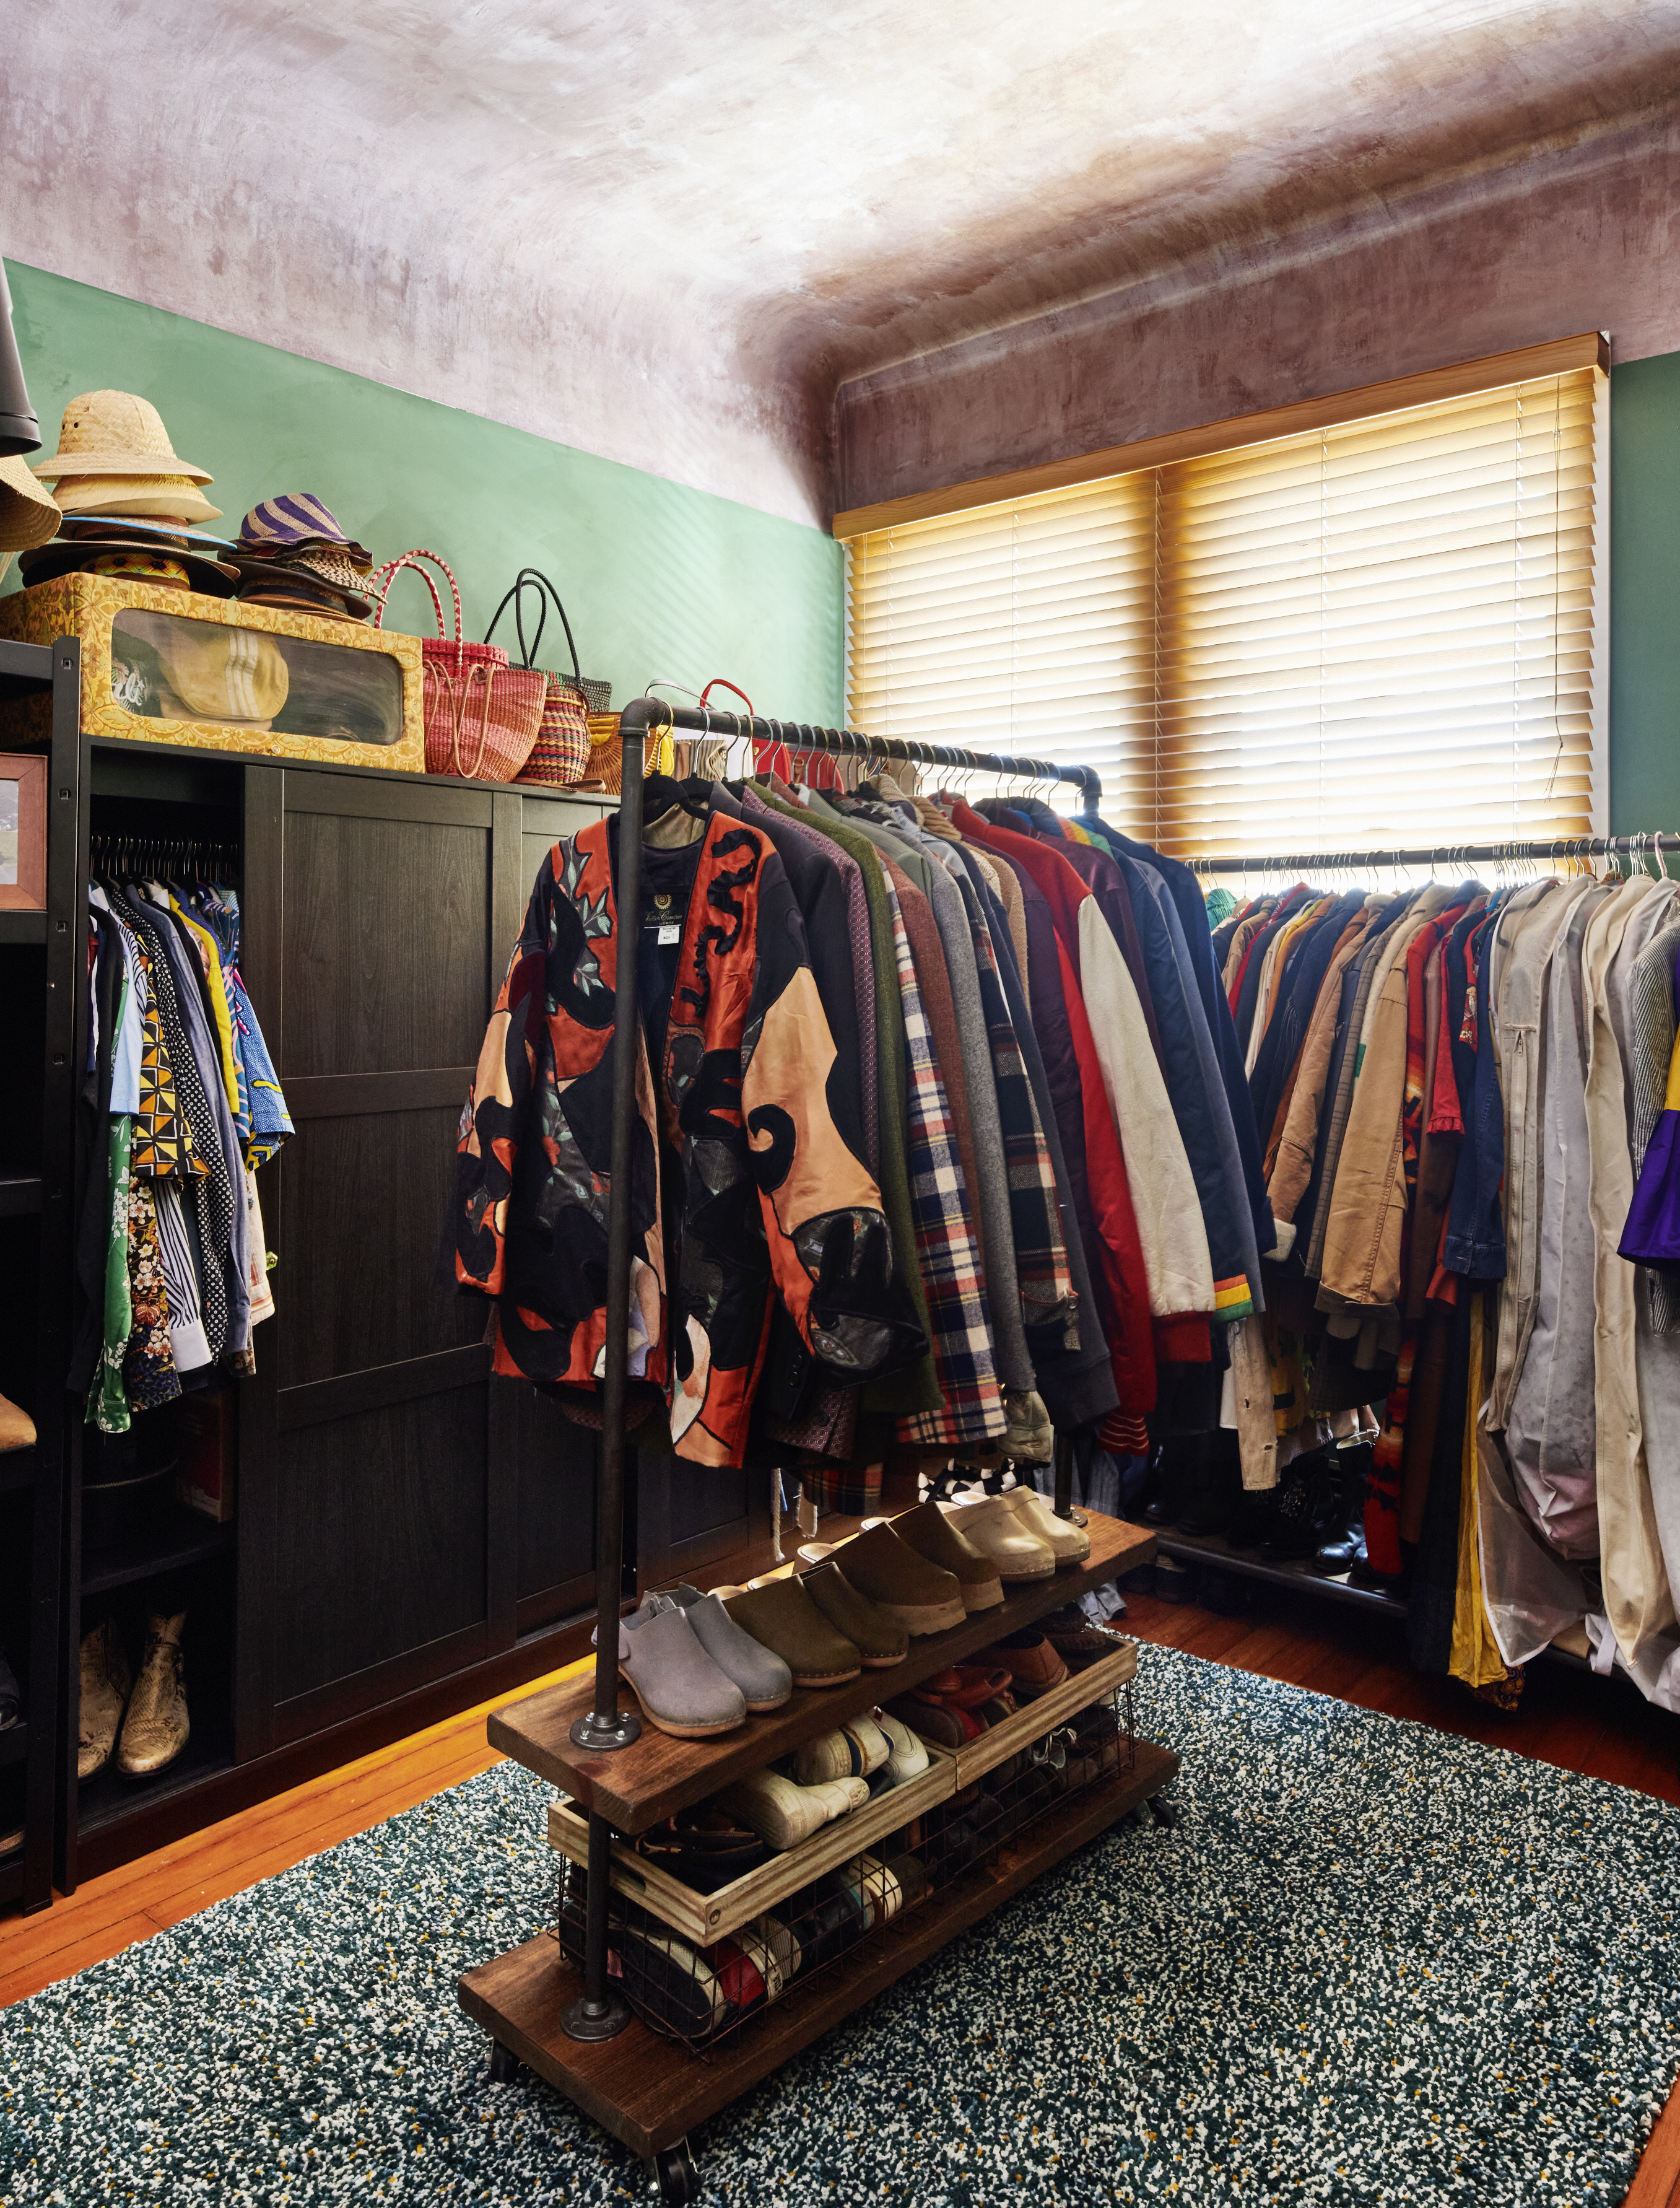 A cozy closet with hats on the top shelf, jackets and shirts hanging, shoes neatly arranged on shelves below, and a window with blinds brightening the space.